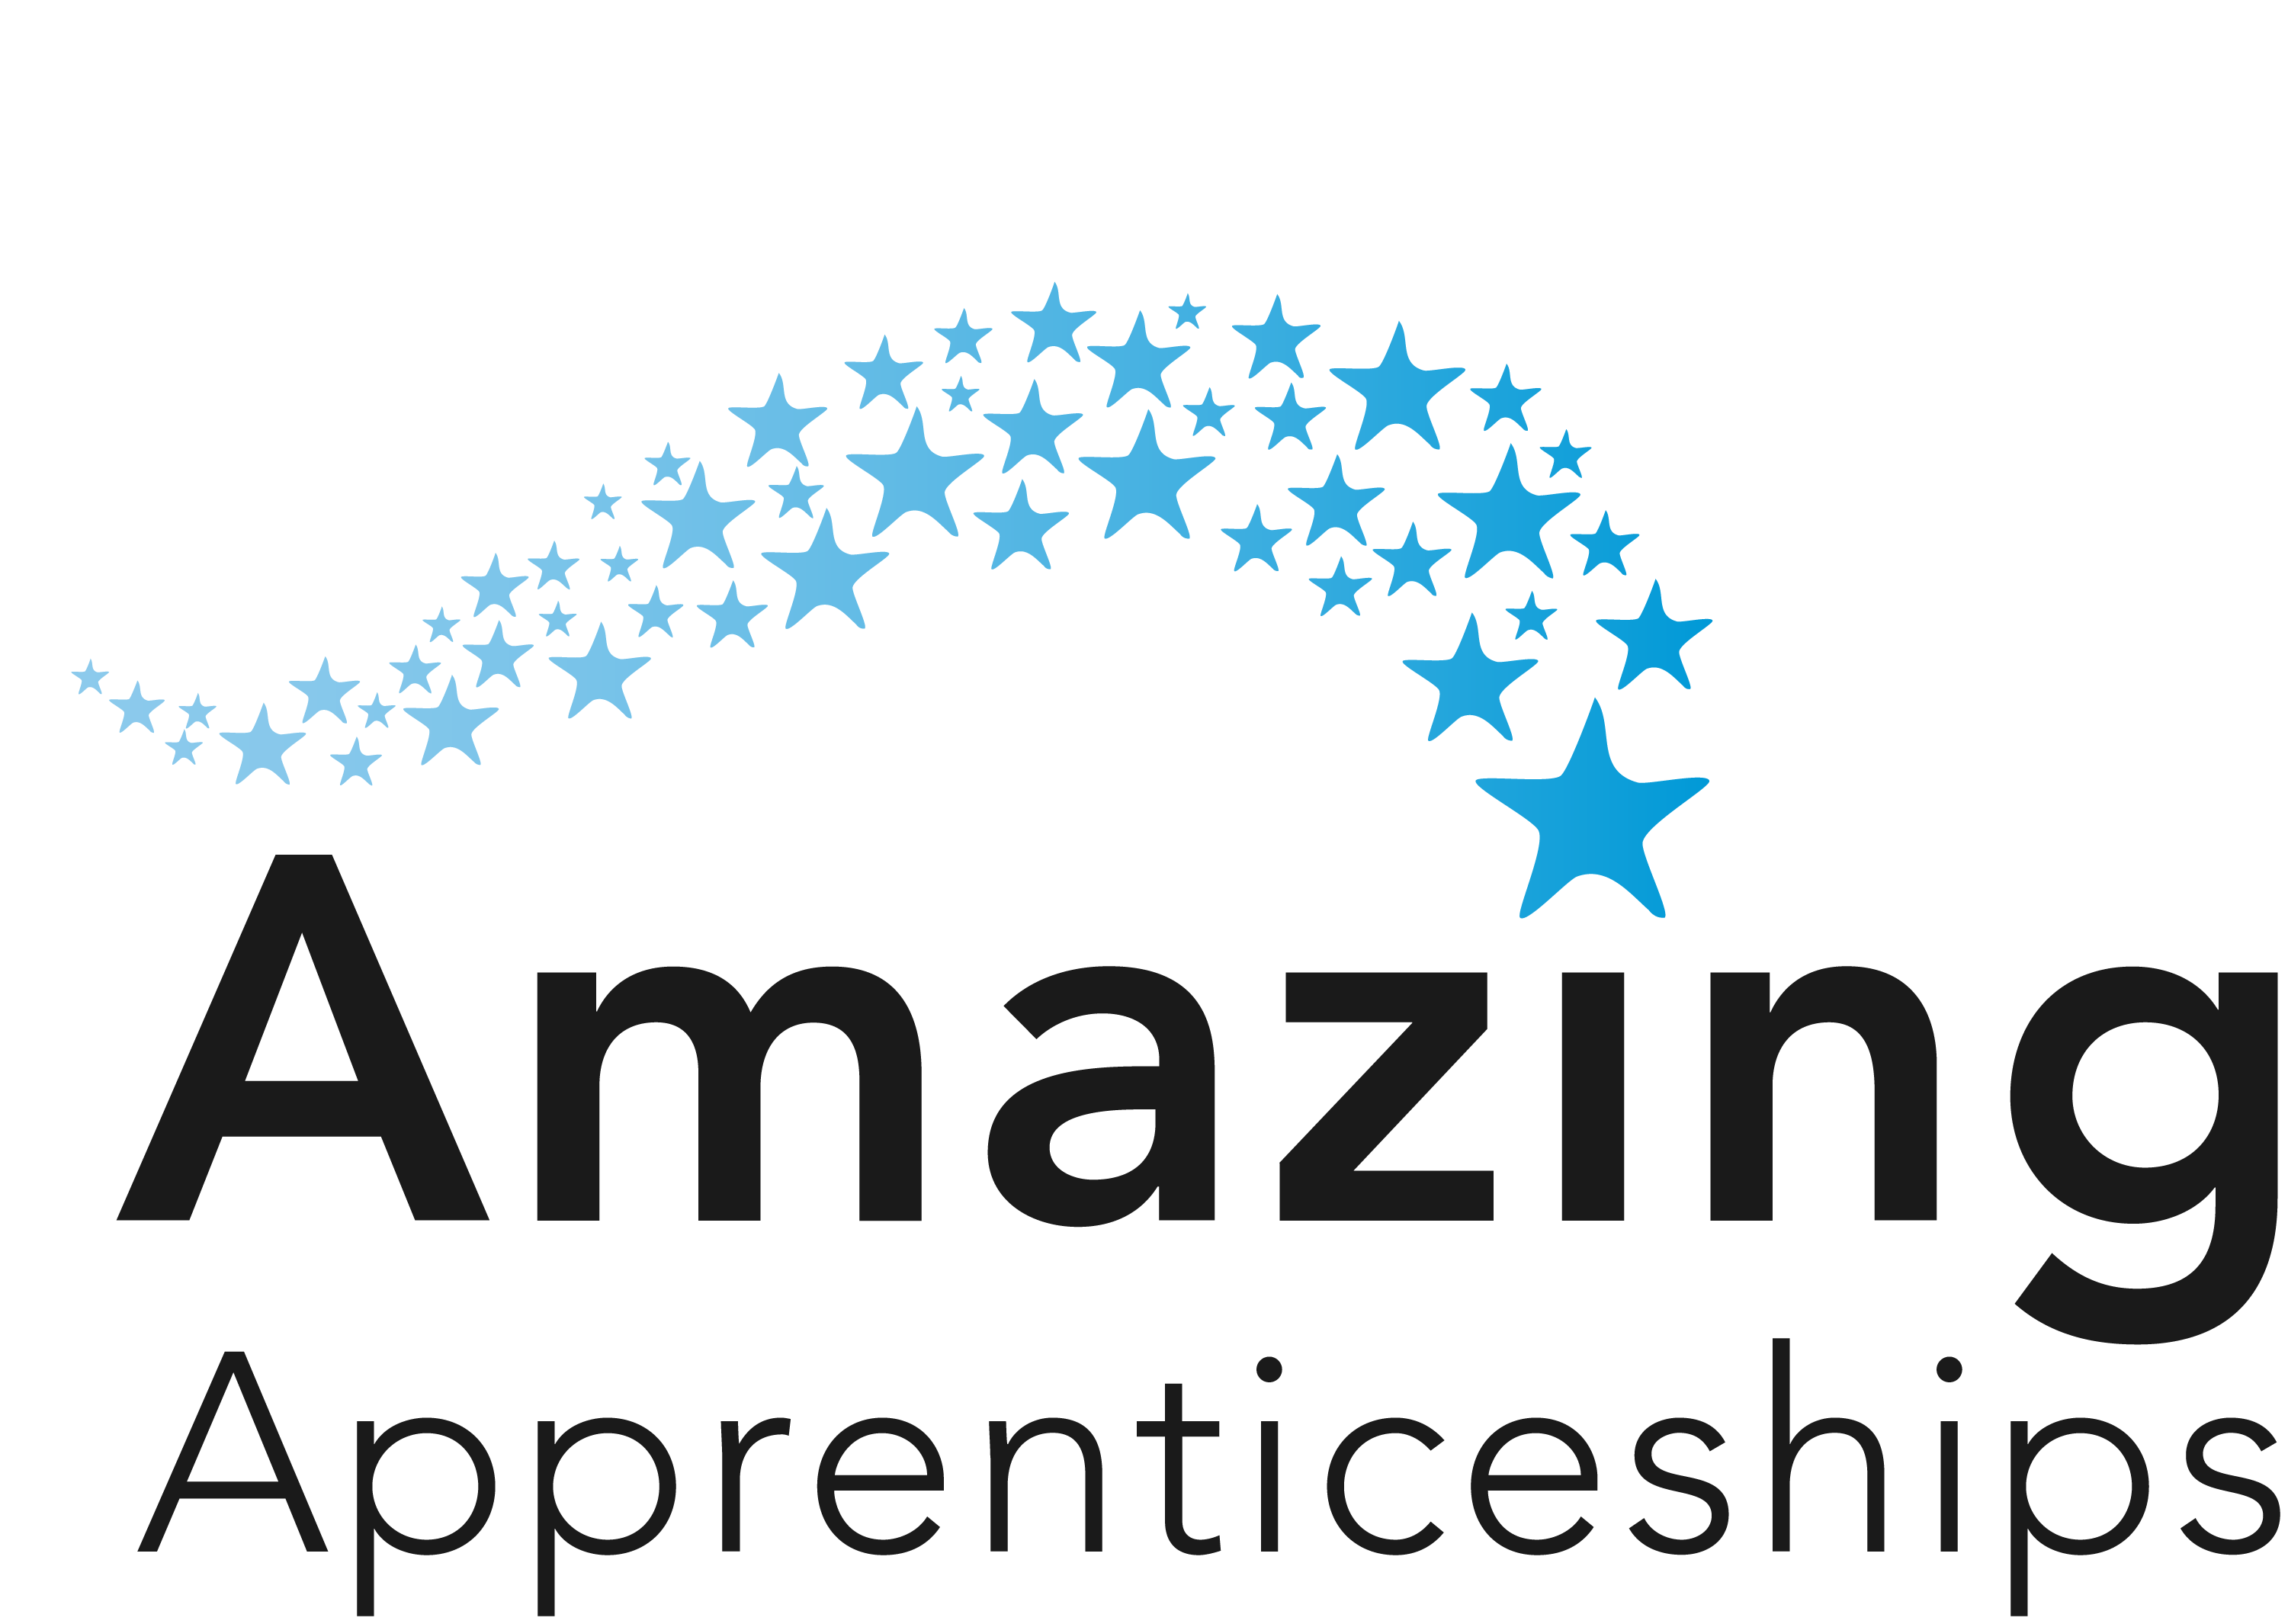 A leading organisation in the education sector, founded to tackle misconceptions about apprenticeships and promote the benefits.